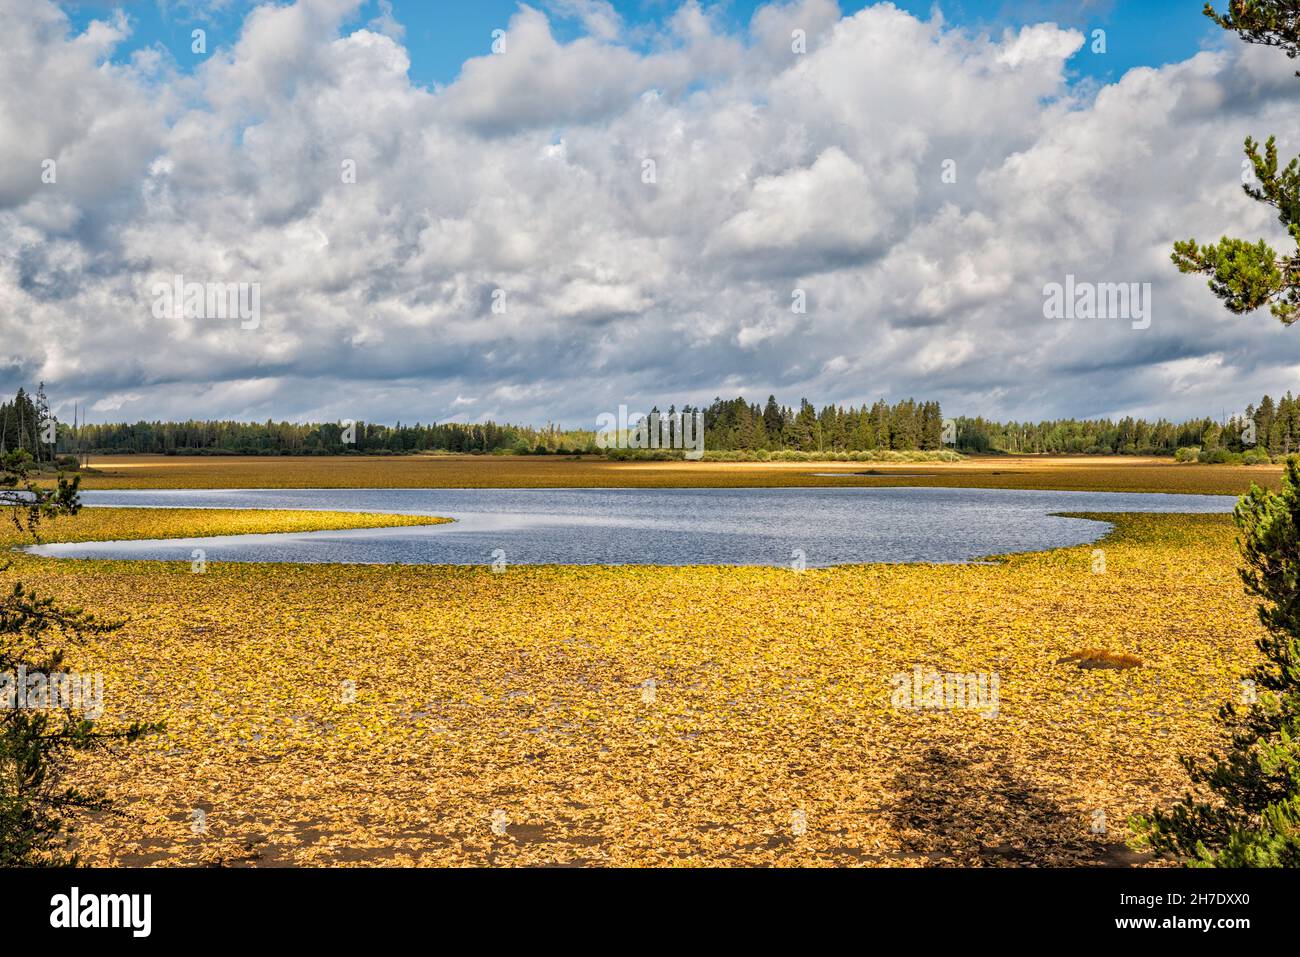 Wilted lily pads in drainage on Indian Lake, view from Grassy Lake Road, Caribou Targhee National Forest, Greater Yellowstone Area, Wyoming, USA Stock Photo